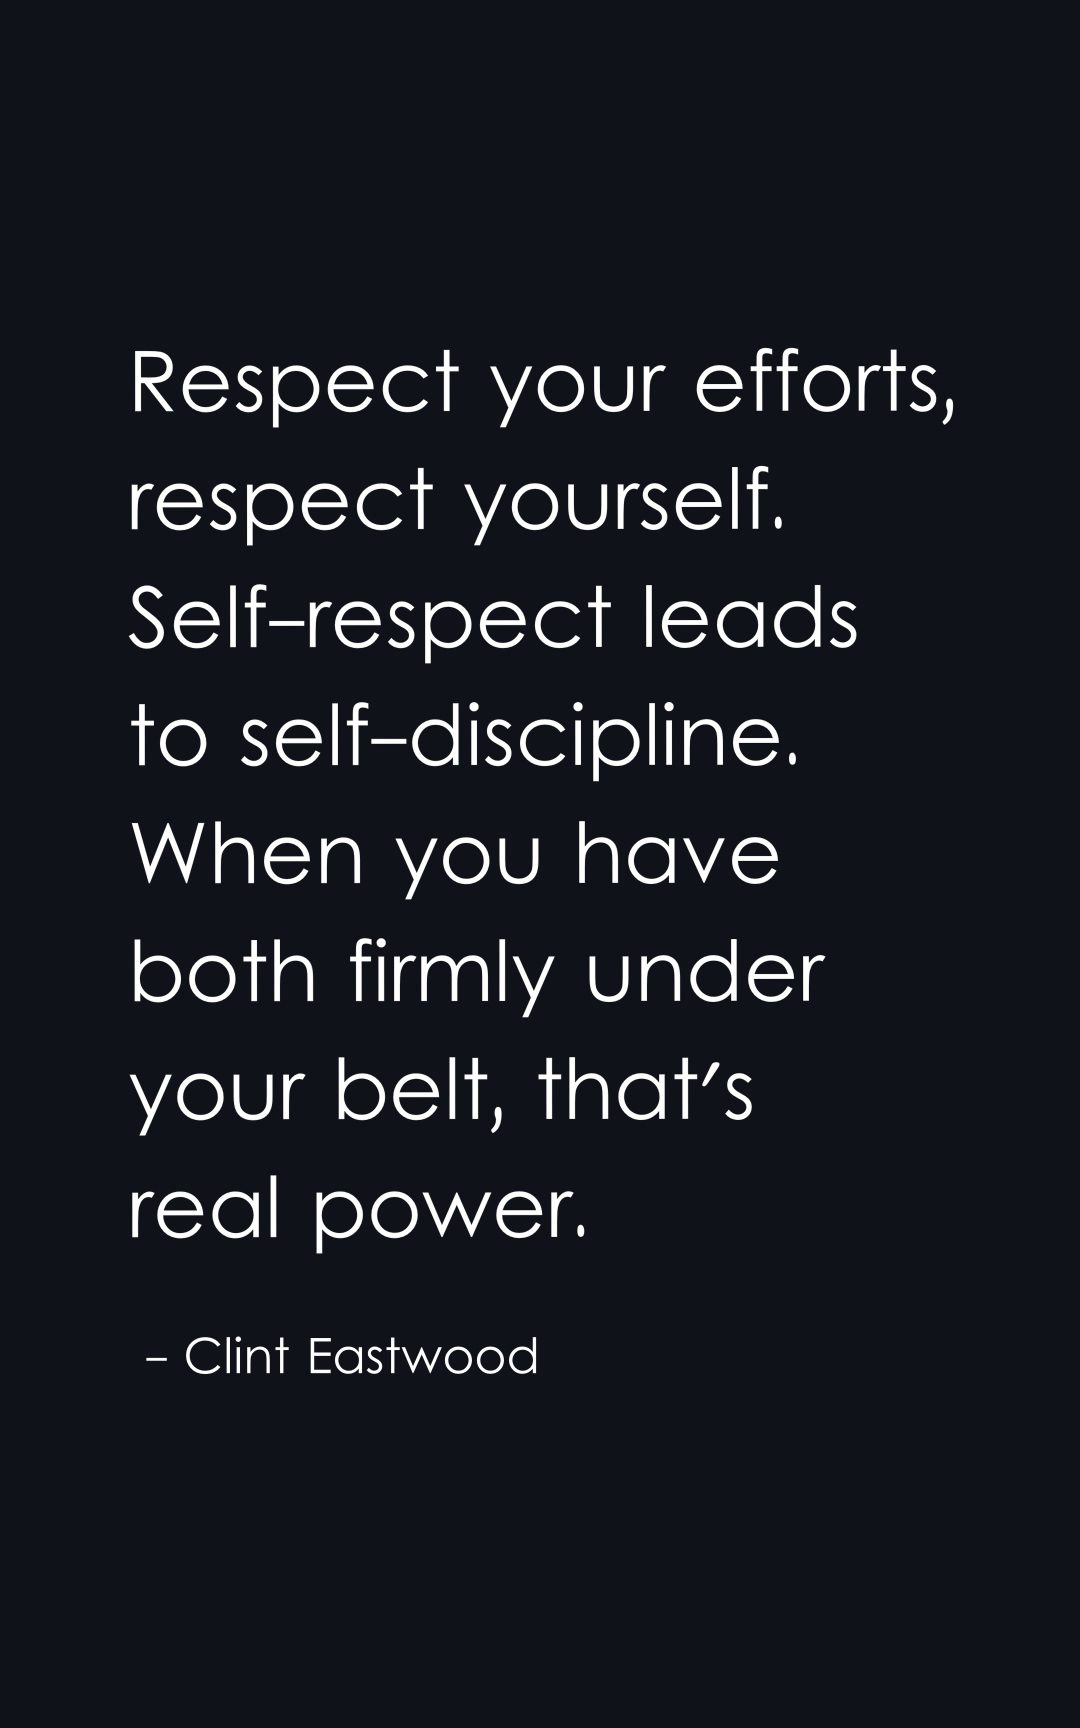 respect your efforts, respect yourself. self-respect leads to self-discipline. when you have both firmly under your belt, that's real power.